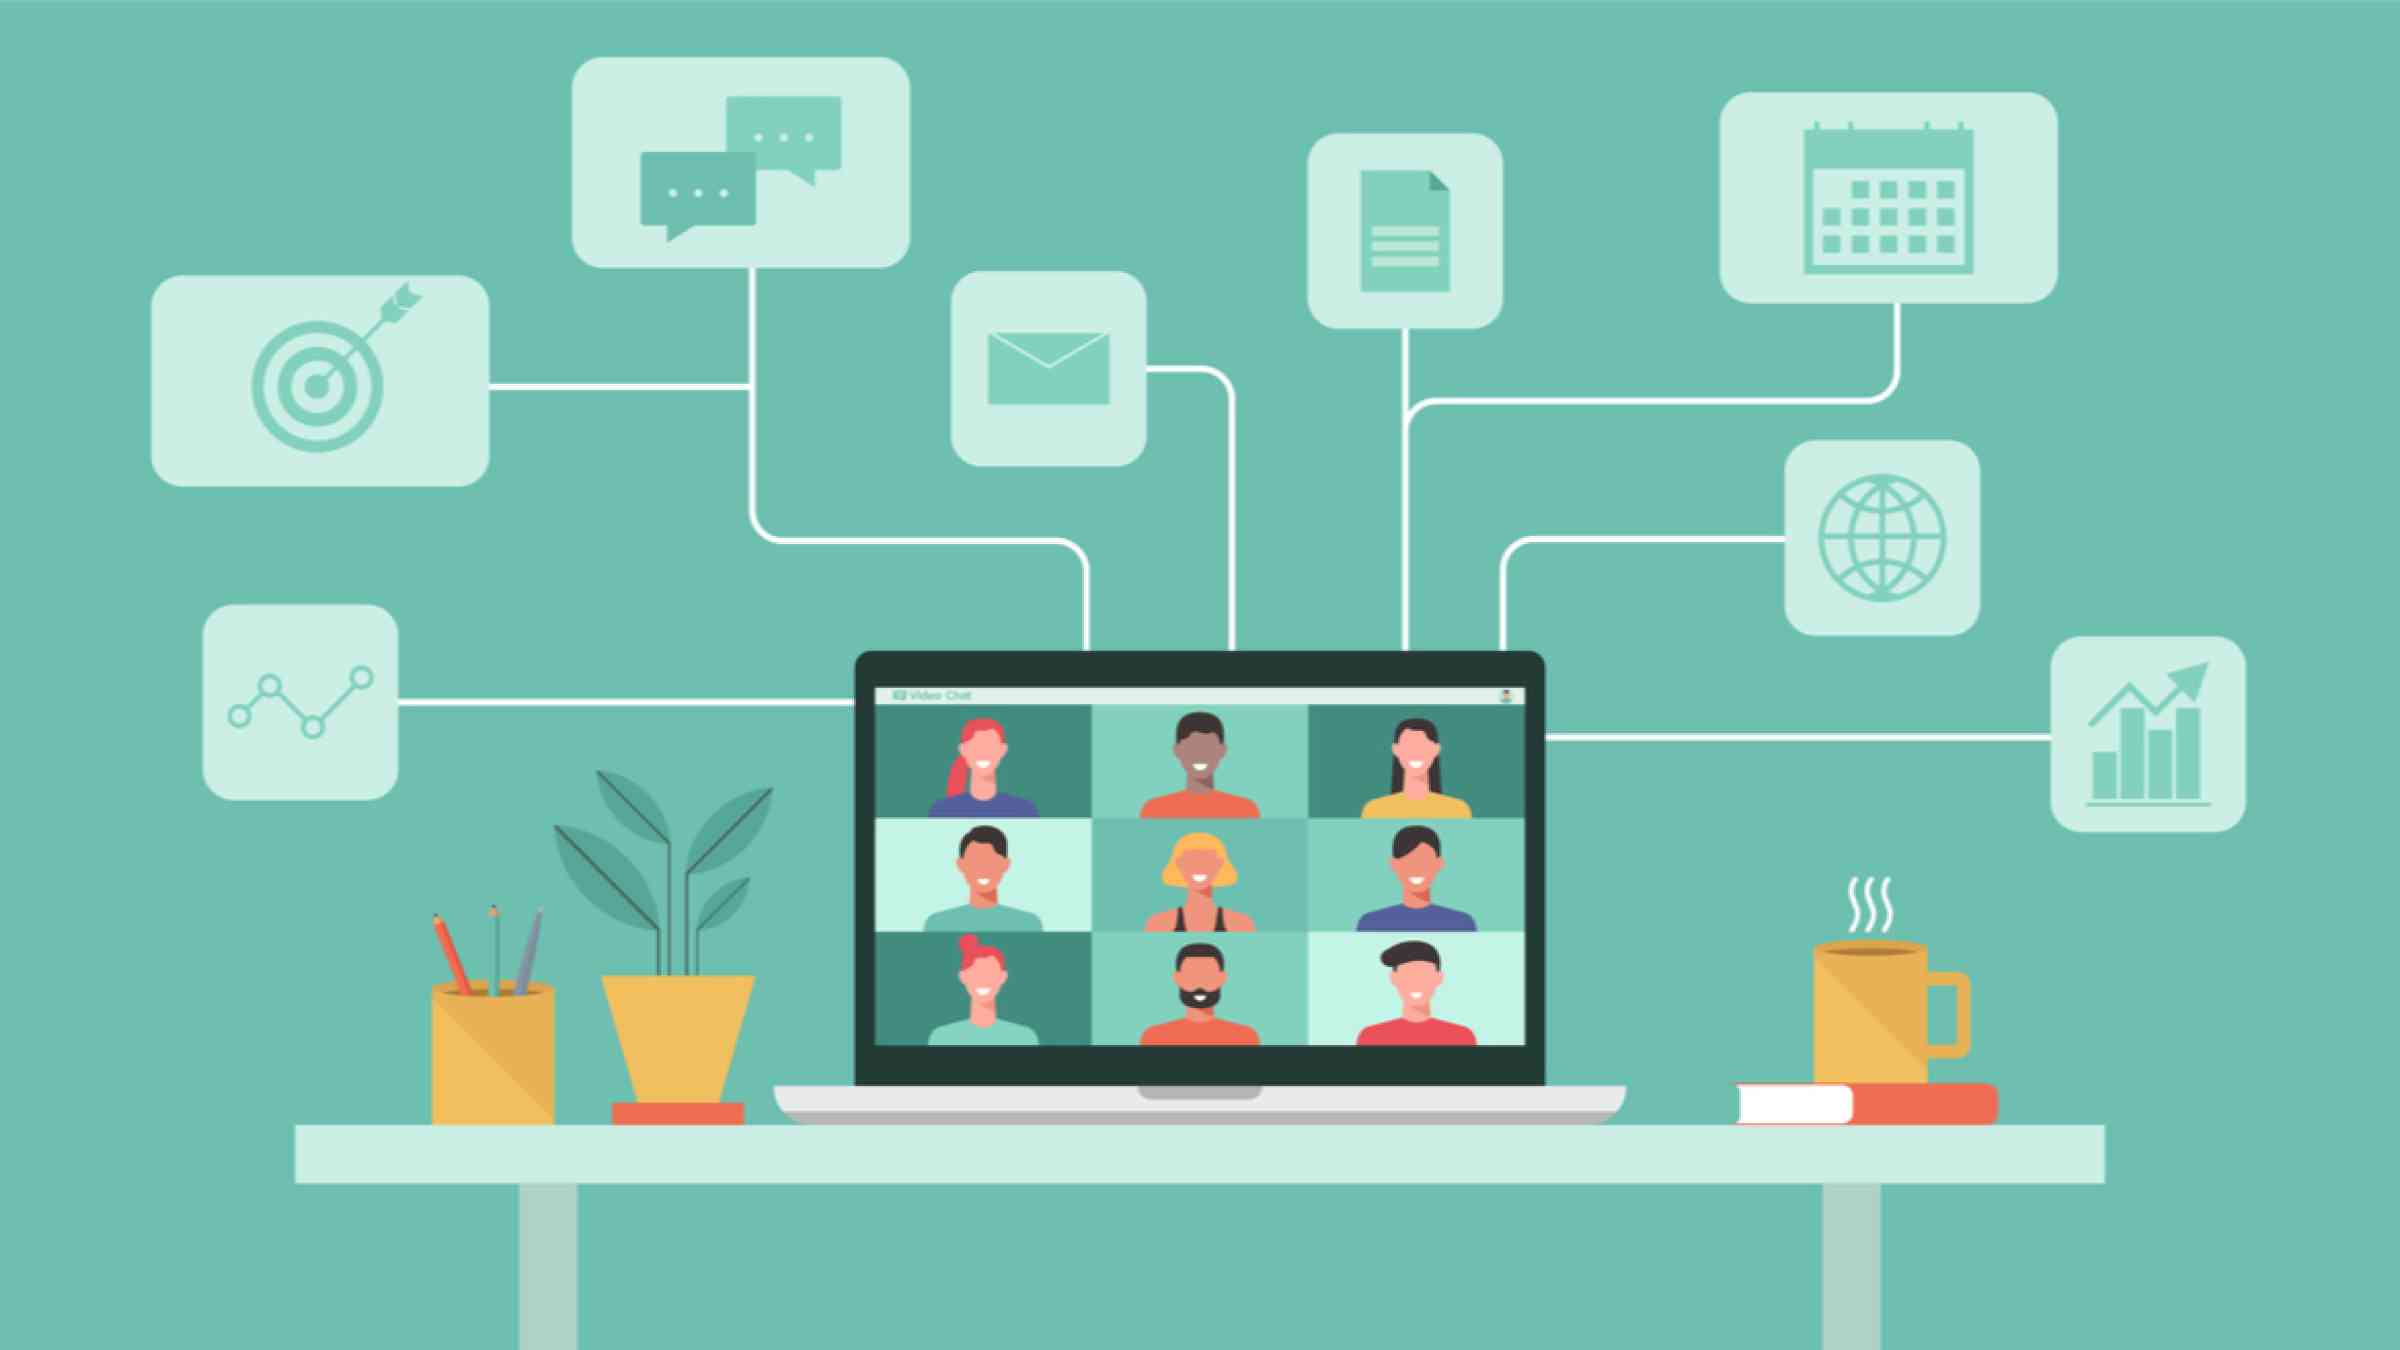 This is a flat vector graphic showing people connecting, learning and meeting online with teleconferencing